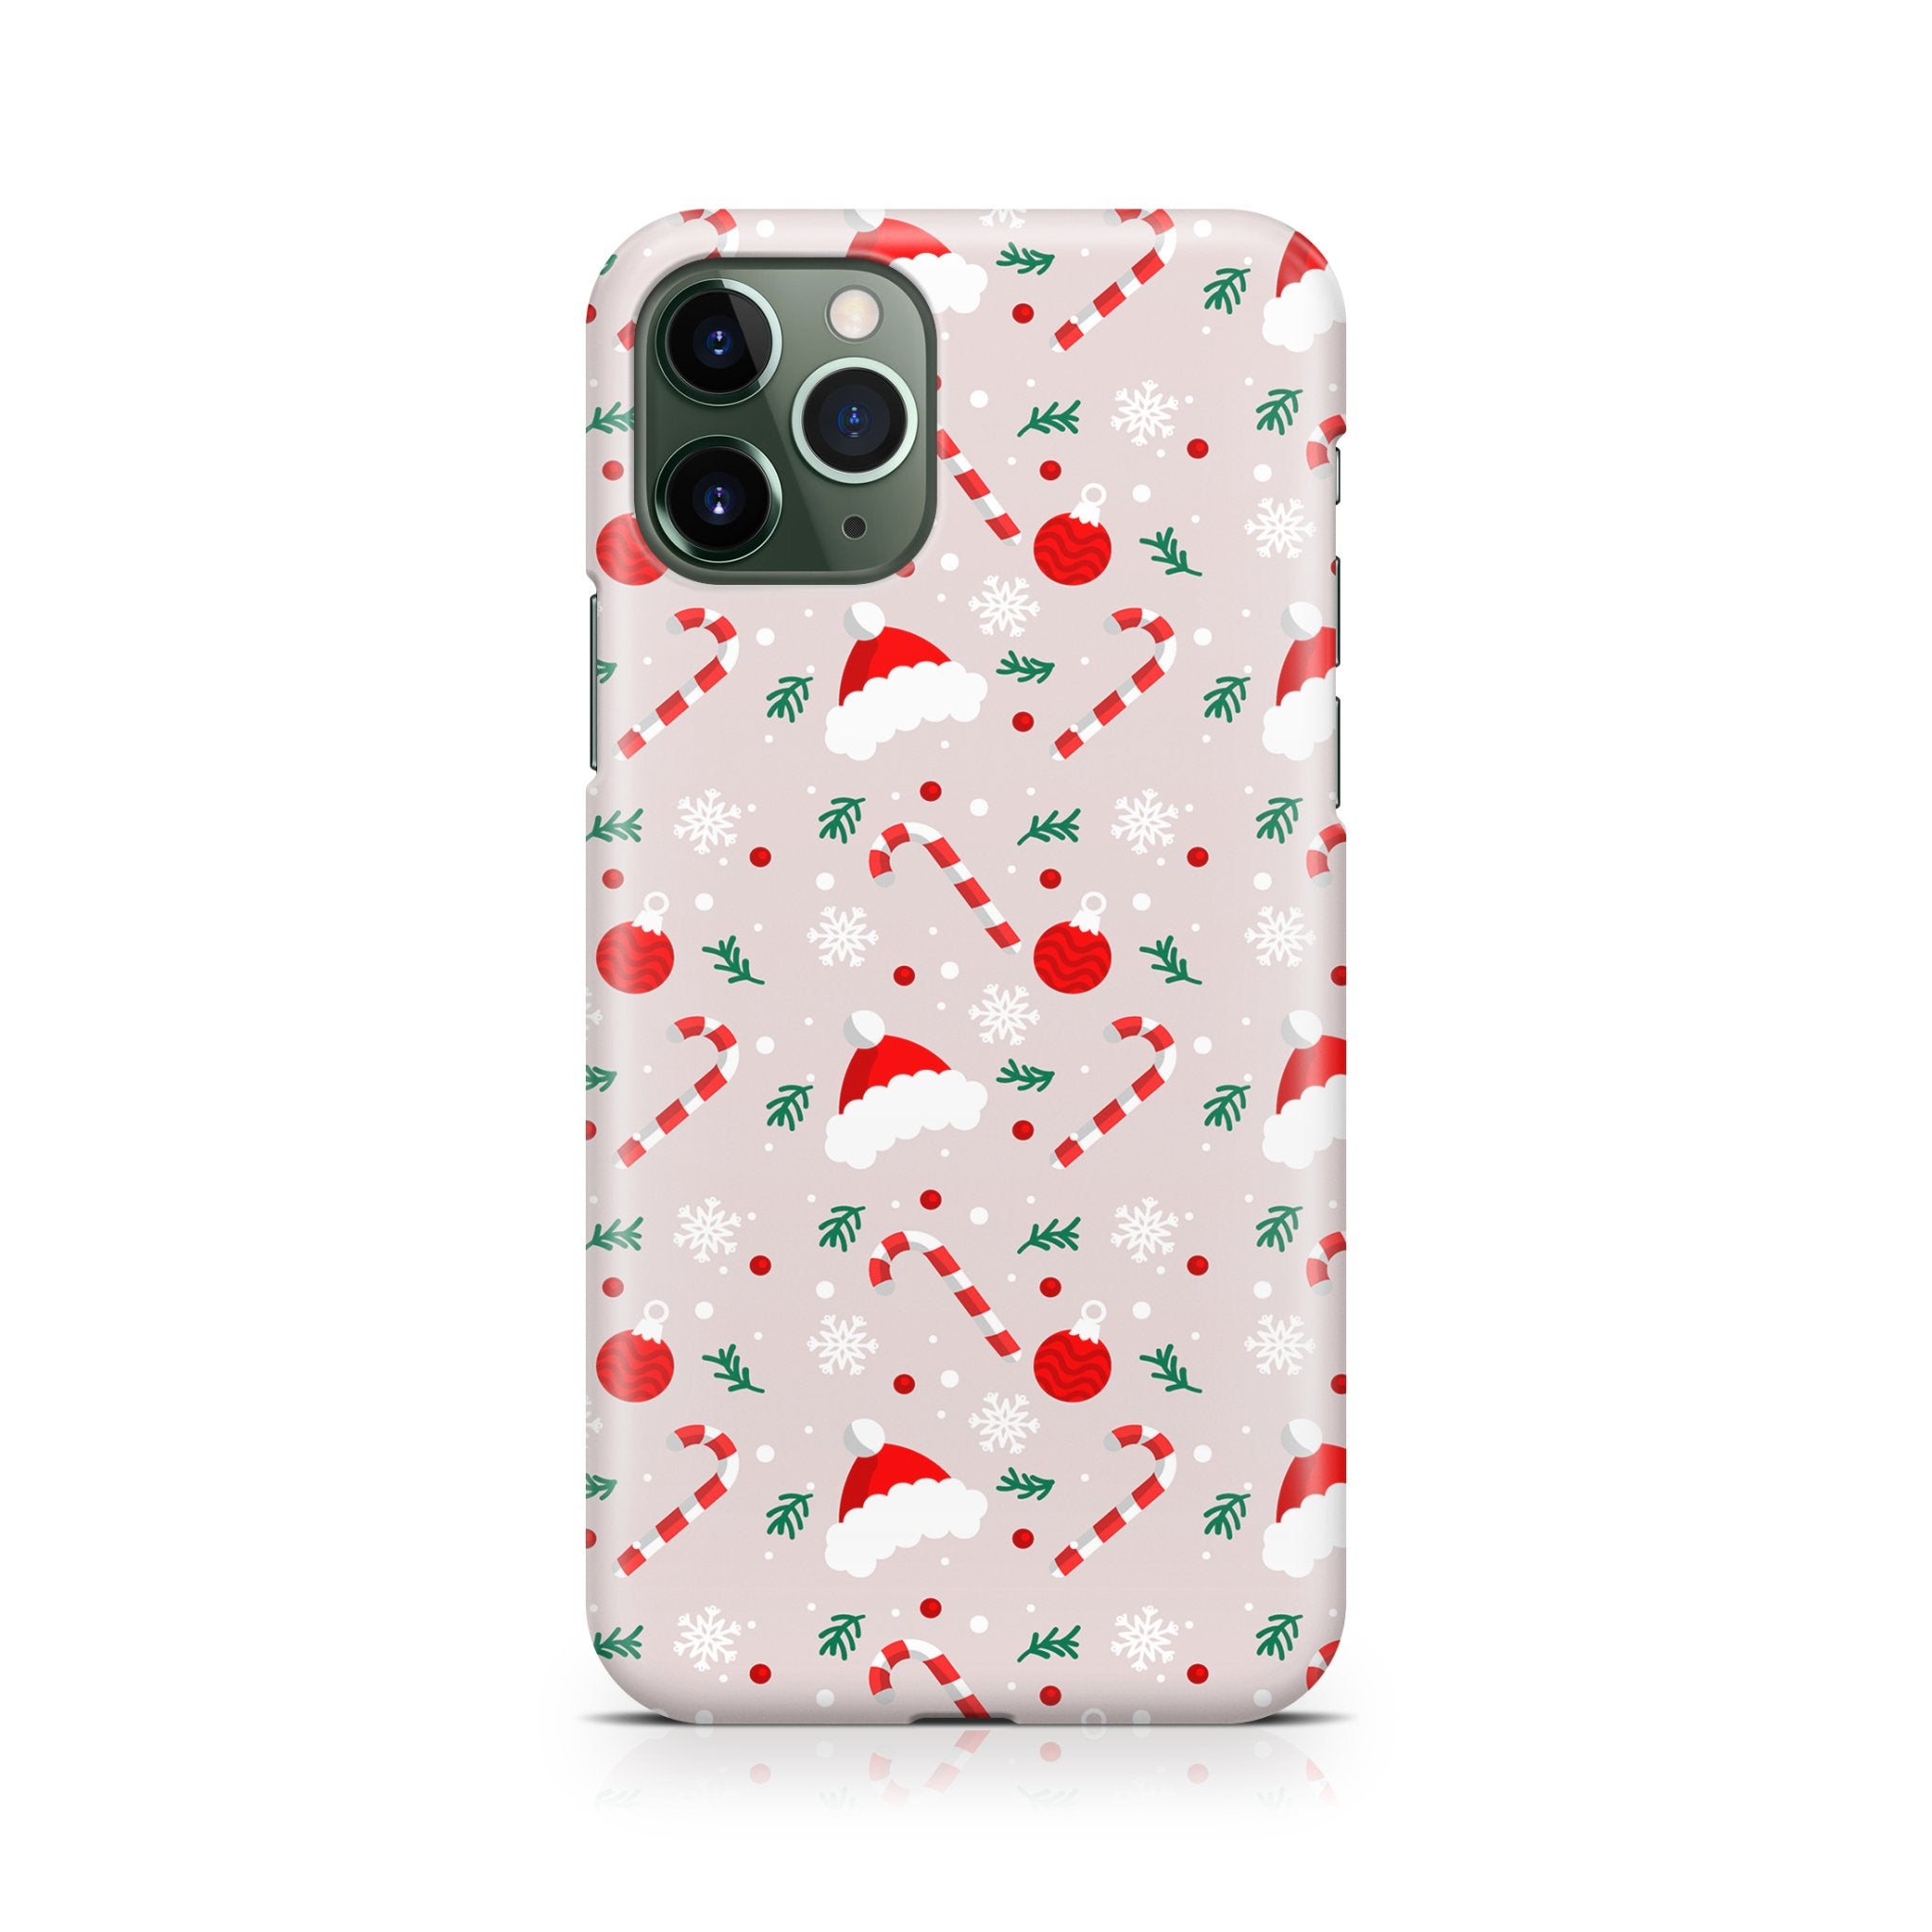 Candy Cane Christmas - iPhone phone case designs by CaseSwagger